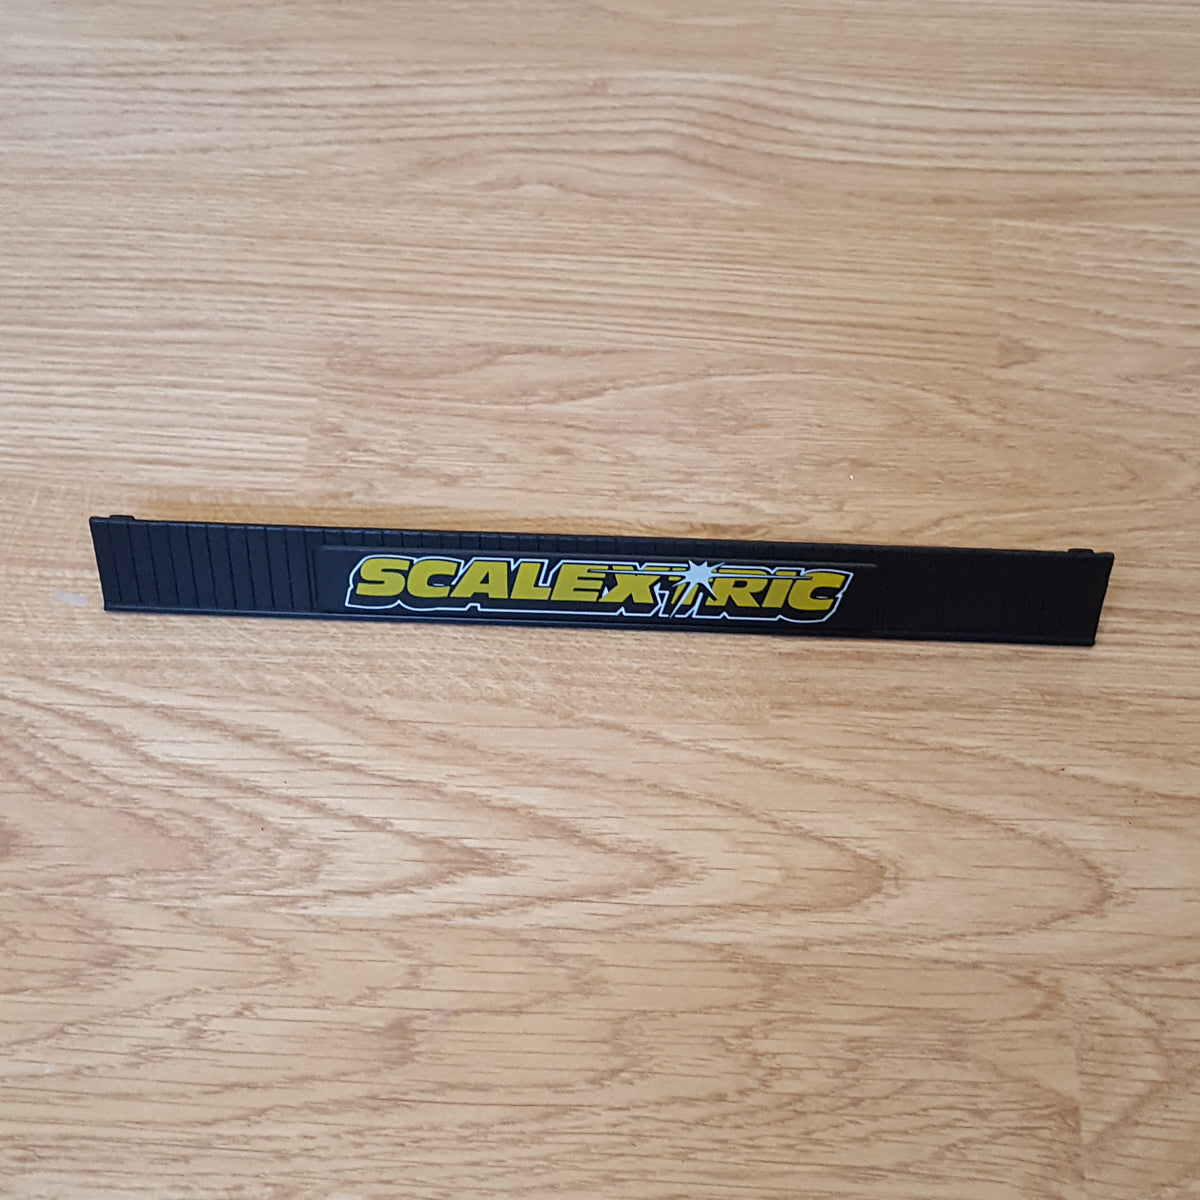 Scalextric 1:32 Spare Part - C705 Grandstand Front Panel "Scalextric"